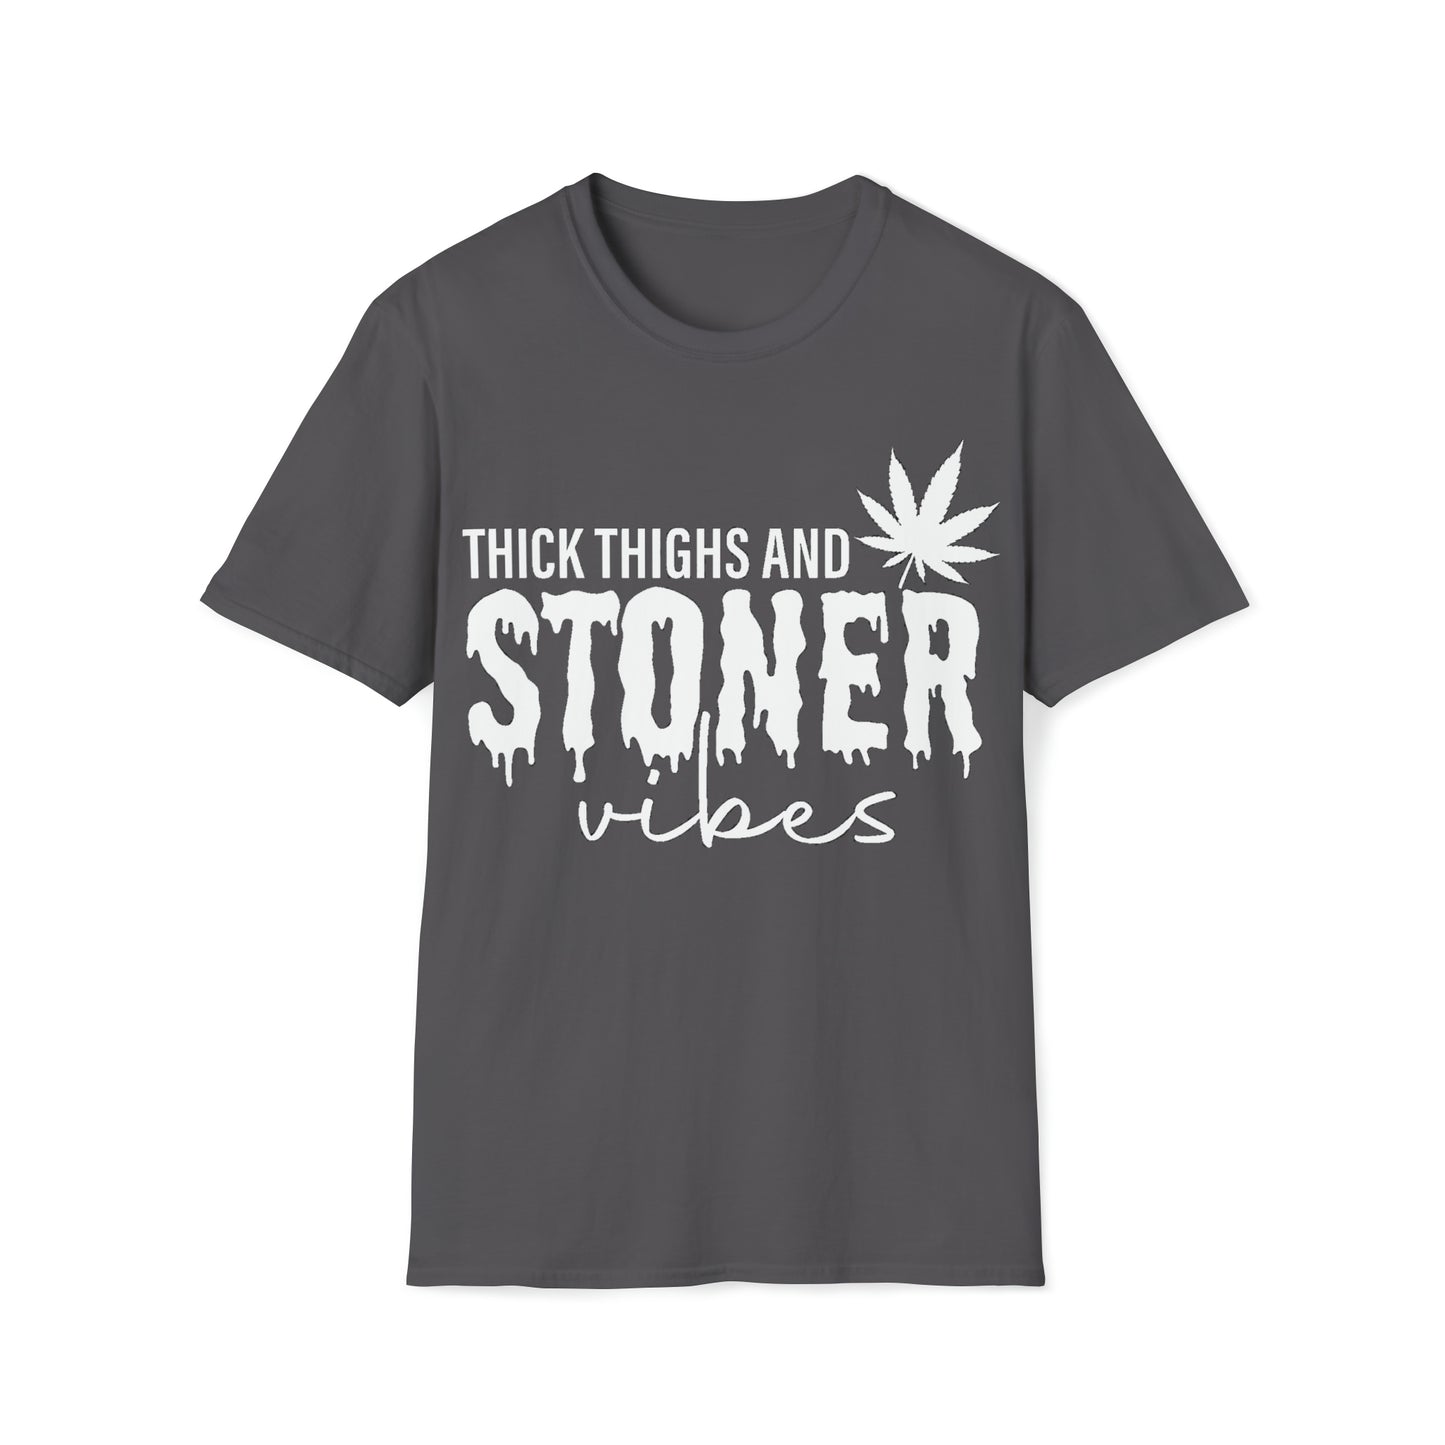 Thick Thighs Stoner Vibes Tee